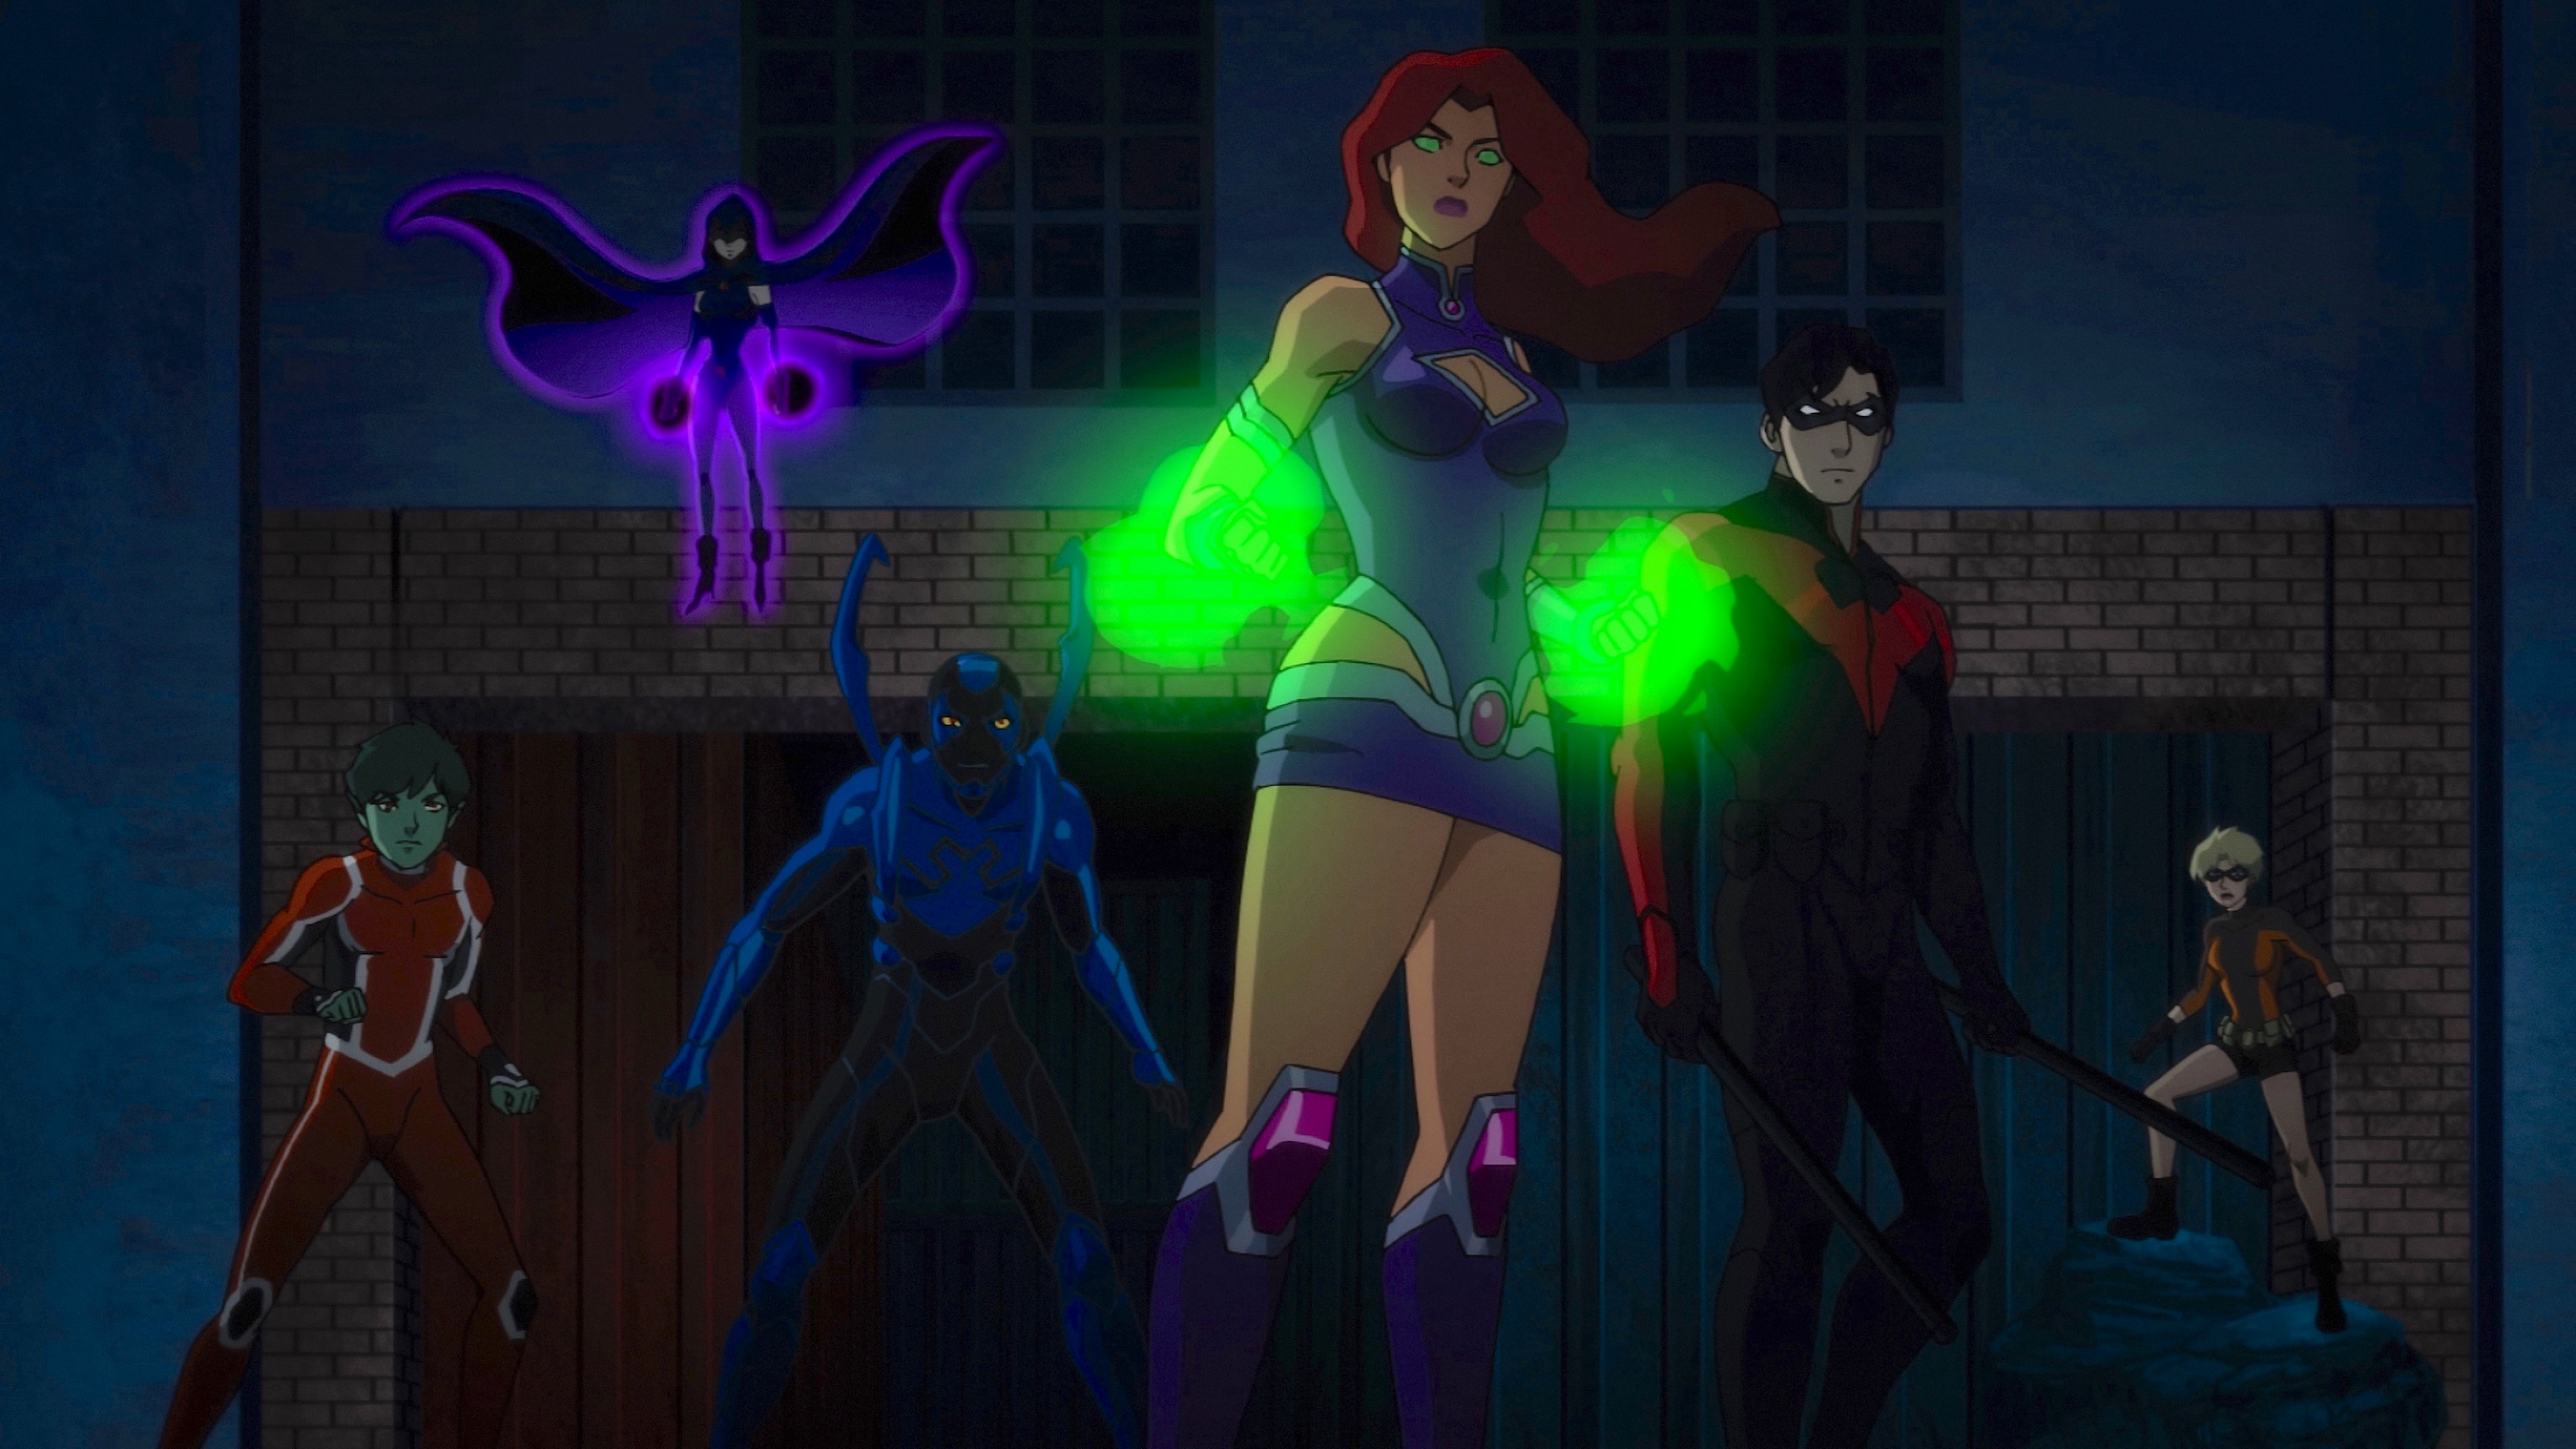 DC Animated Film 'Teen Titans: The Judas Project' to Premiere at WonderCon  Anaheim | San Diego Comic-Con Unofficial Blog